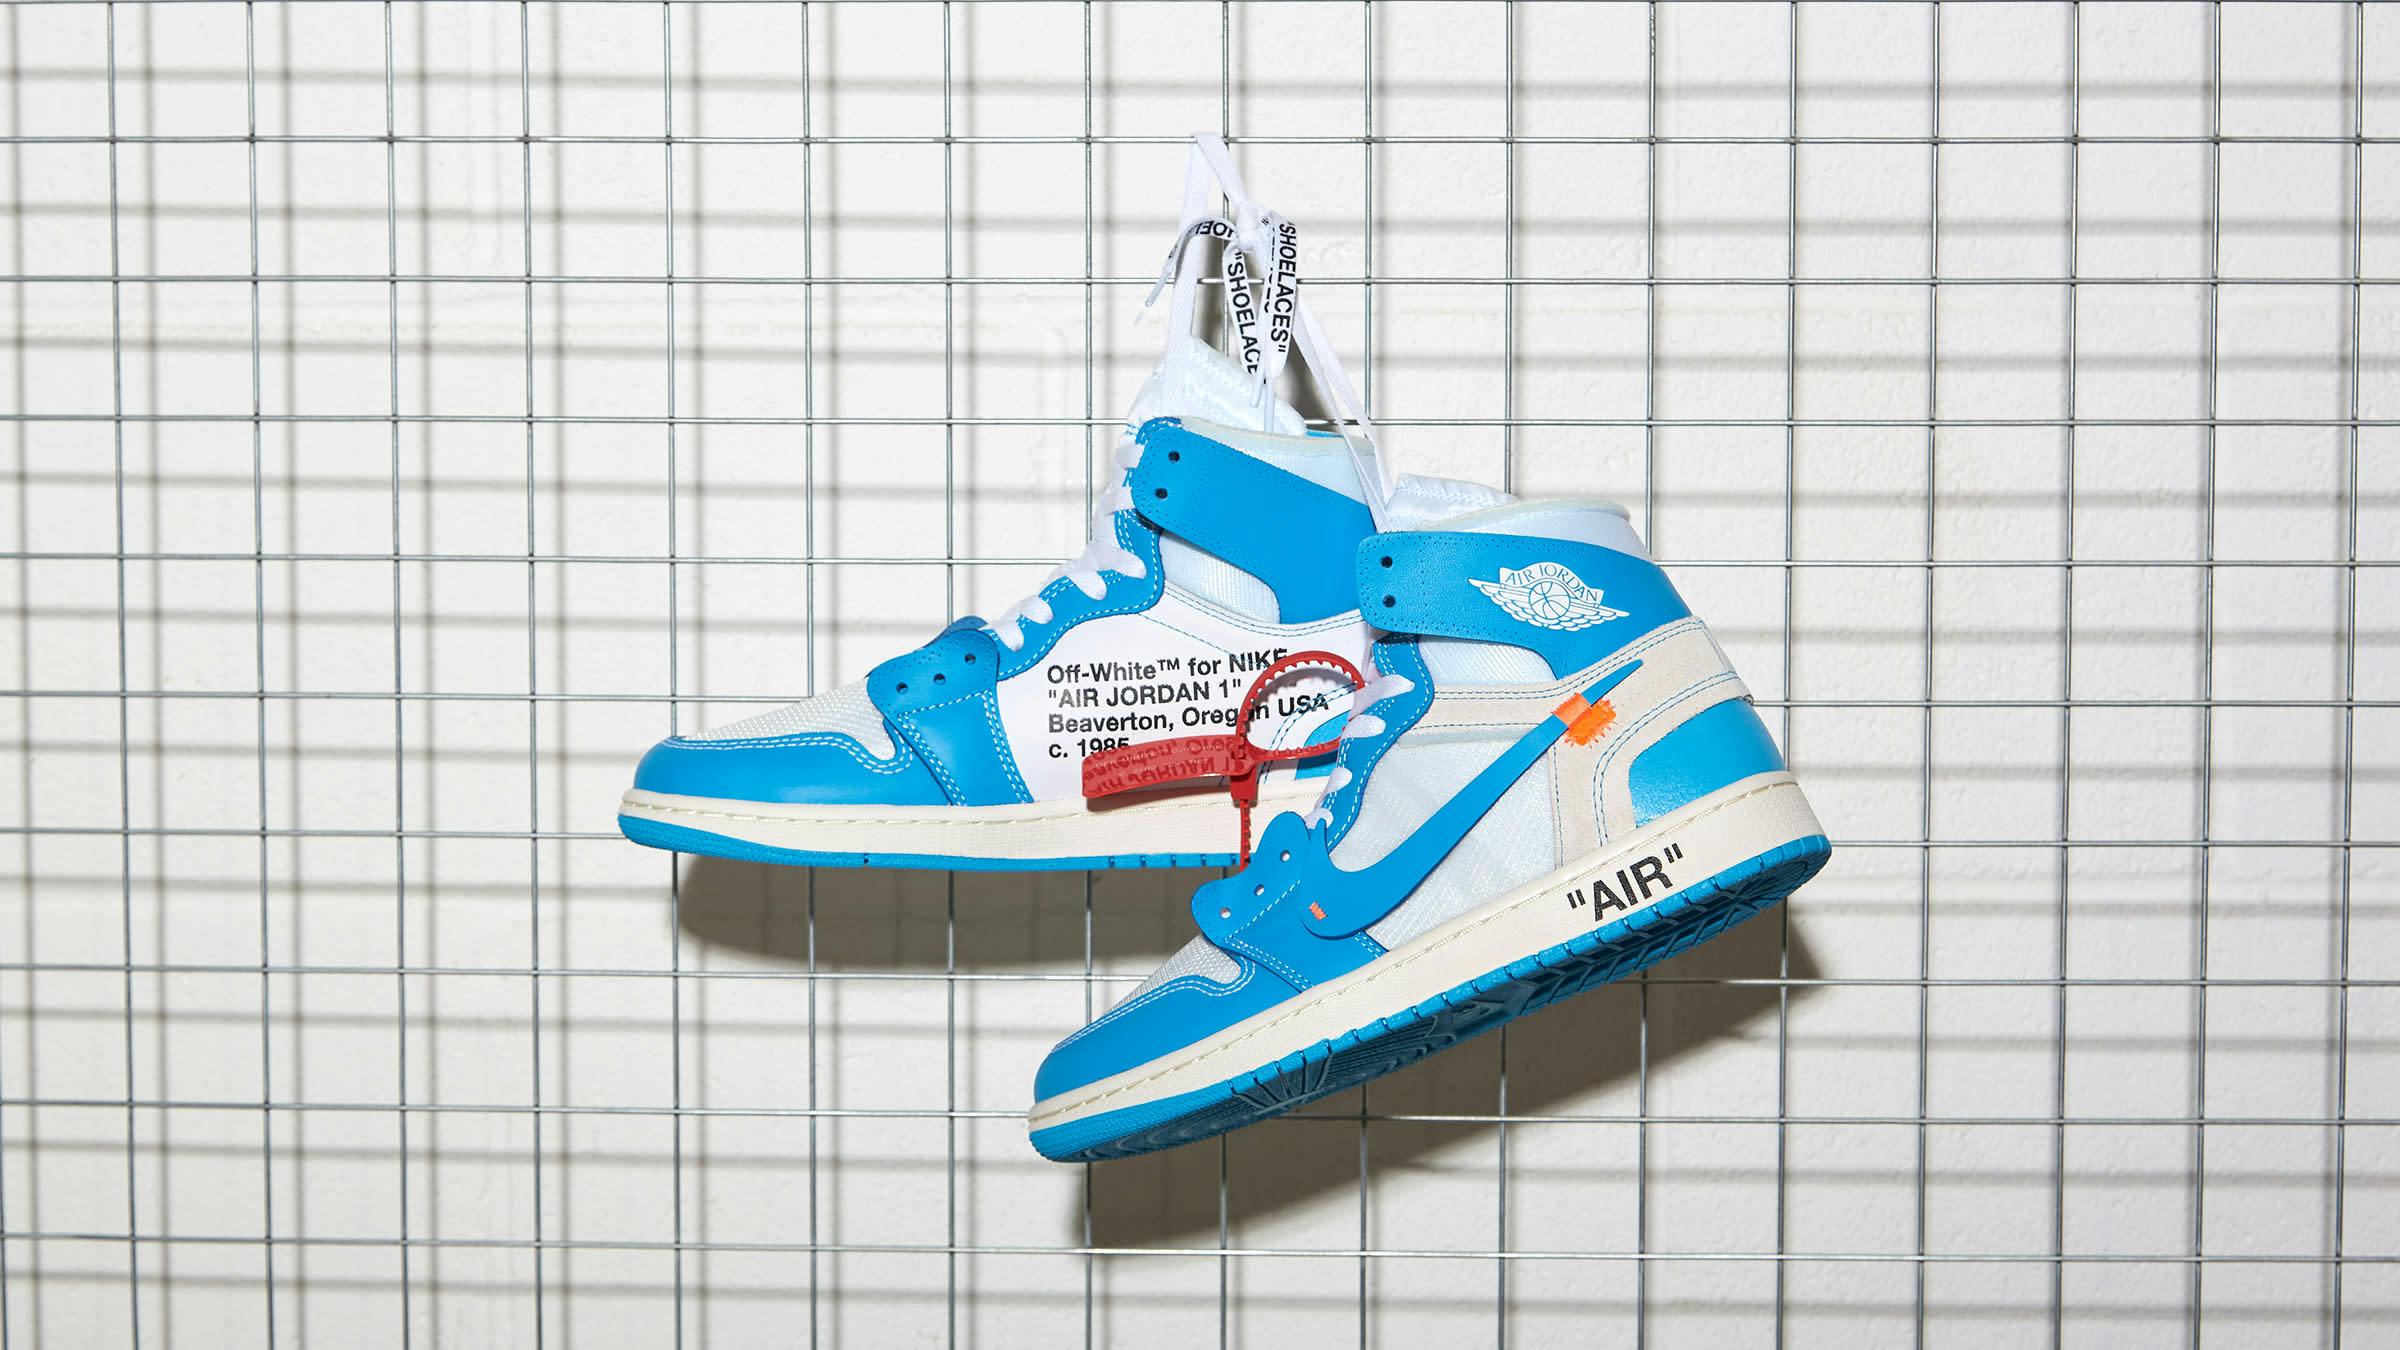 Off-White x Air Jordan 1 Energy 'UNC' - Register now on END. Launches